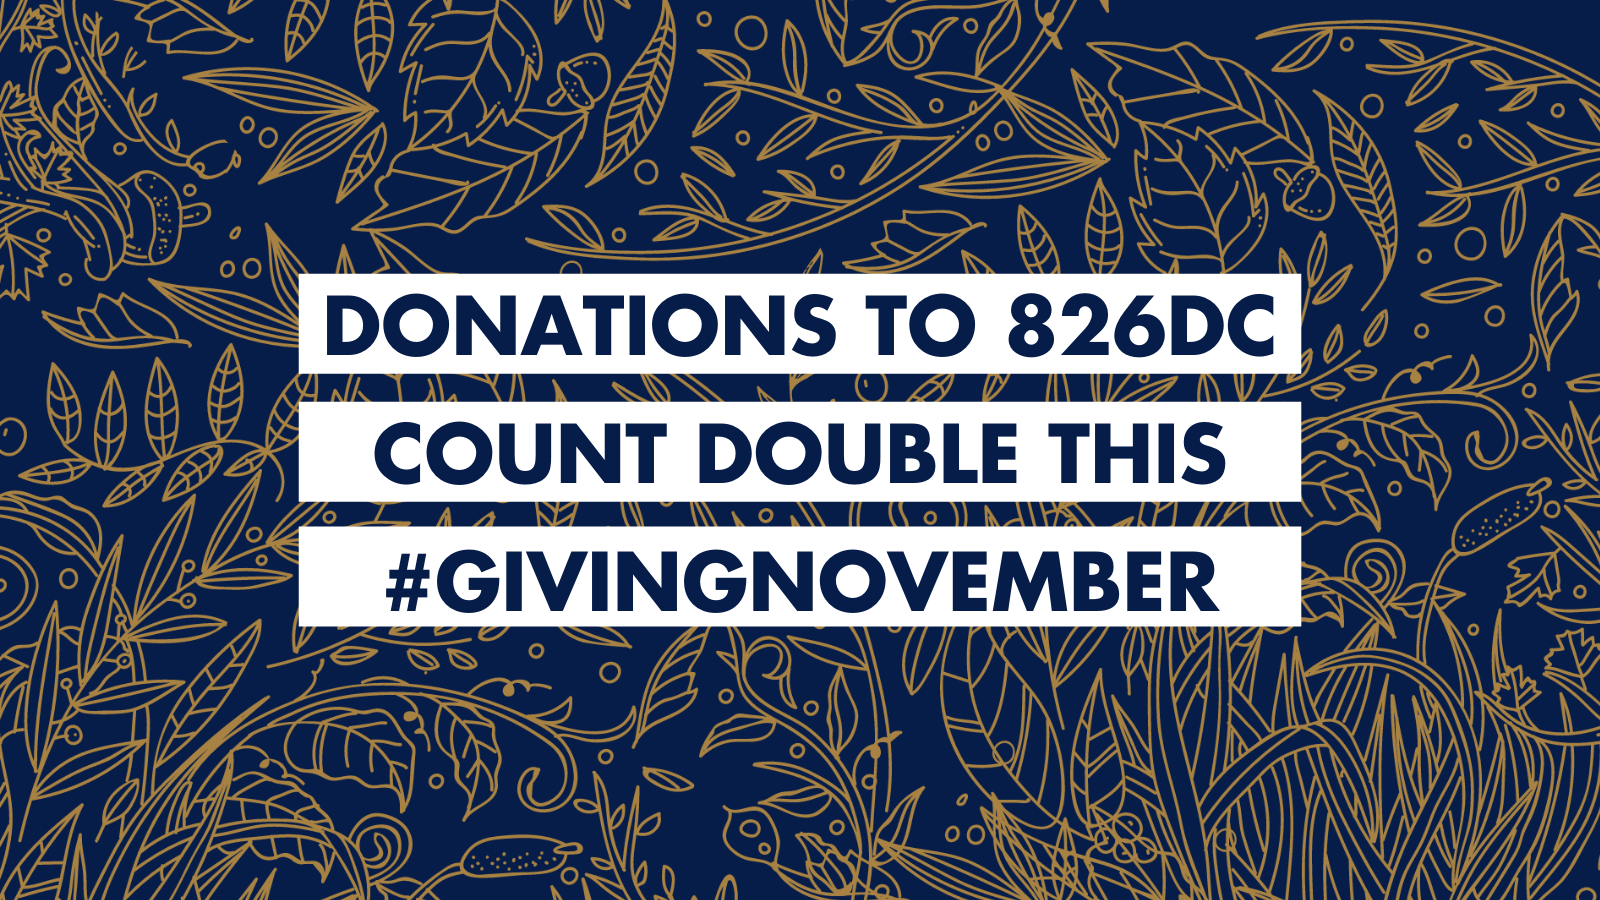 Donations to 826DC count double this giving november